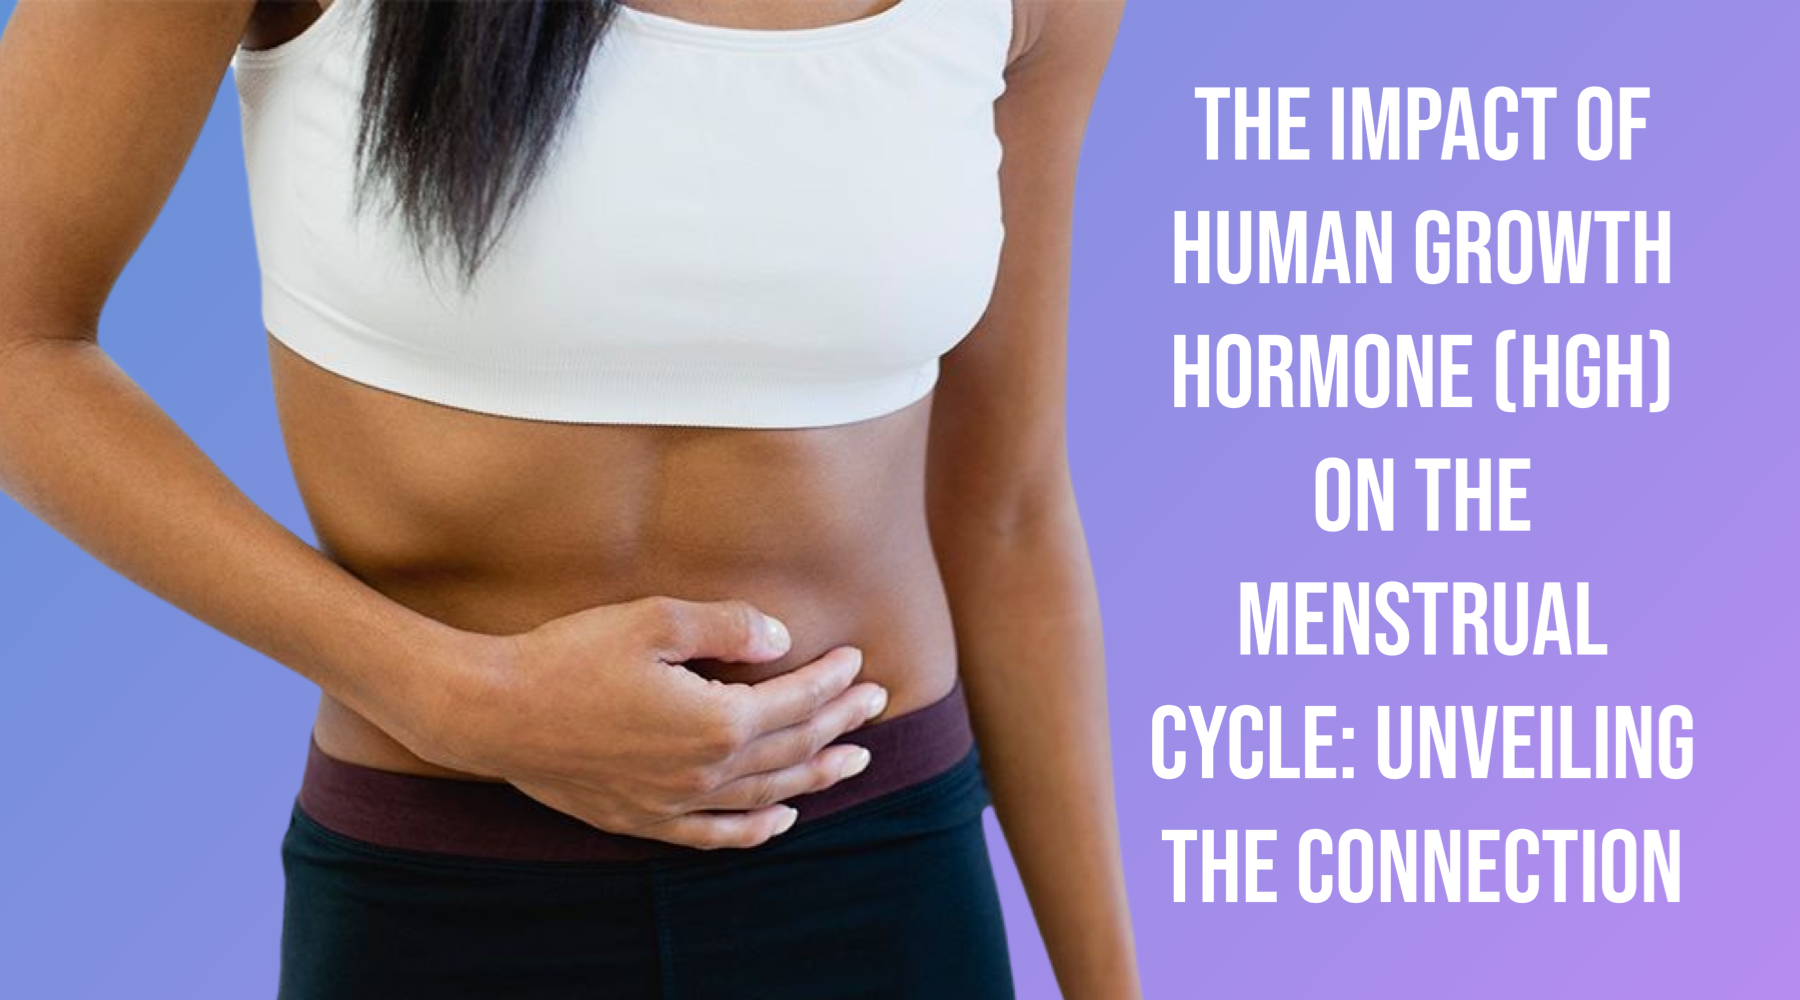 The Impact of Human Growth Hormone (HGH) on the Menstrual Cycle: Unveiling the Connection